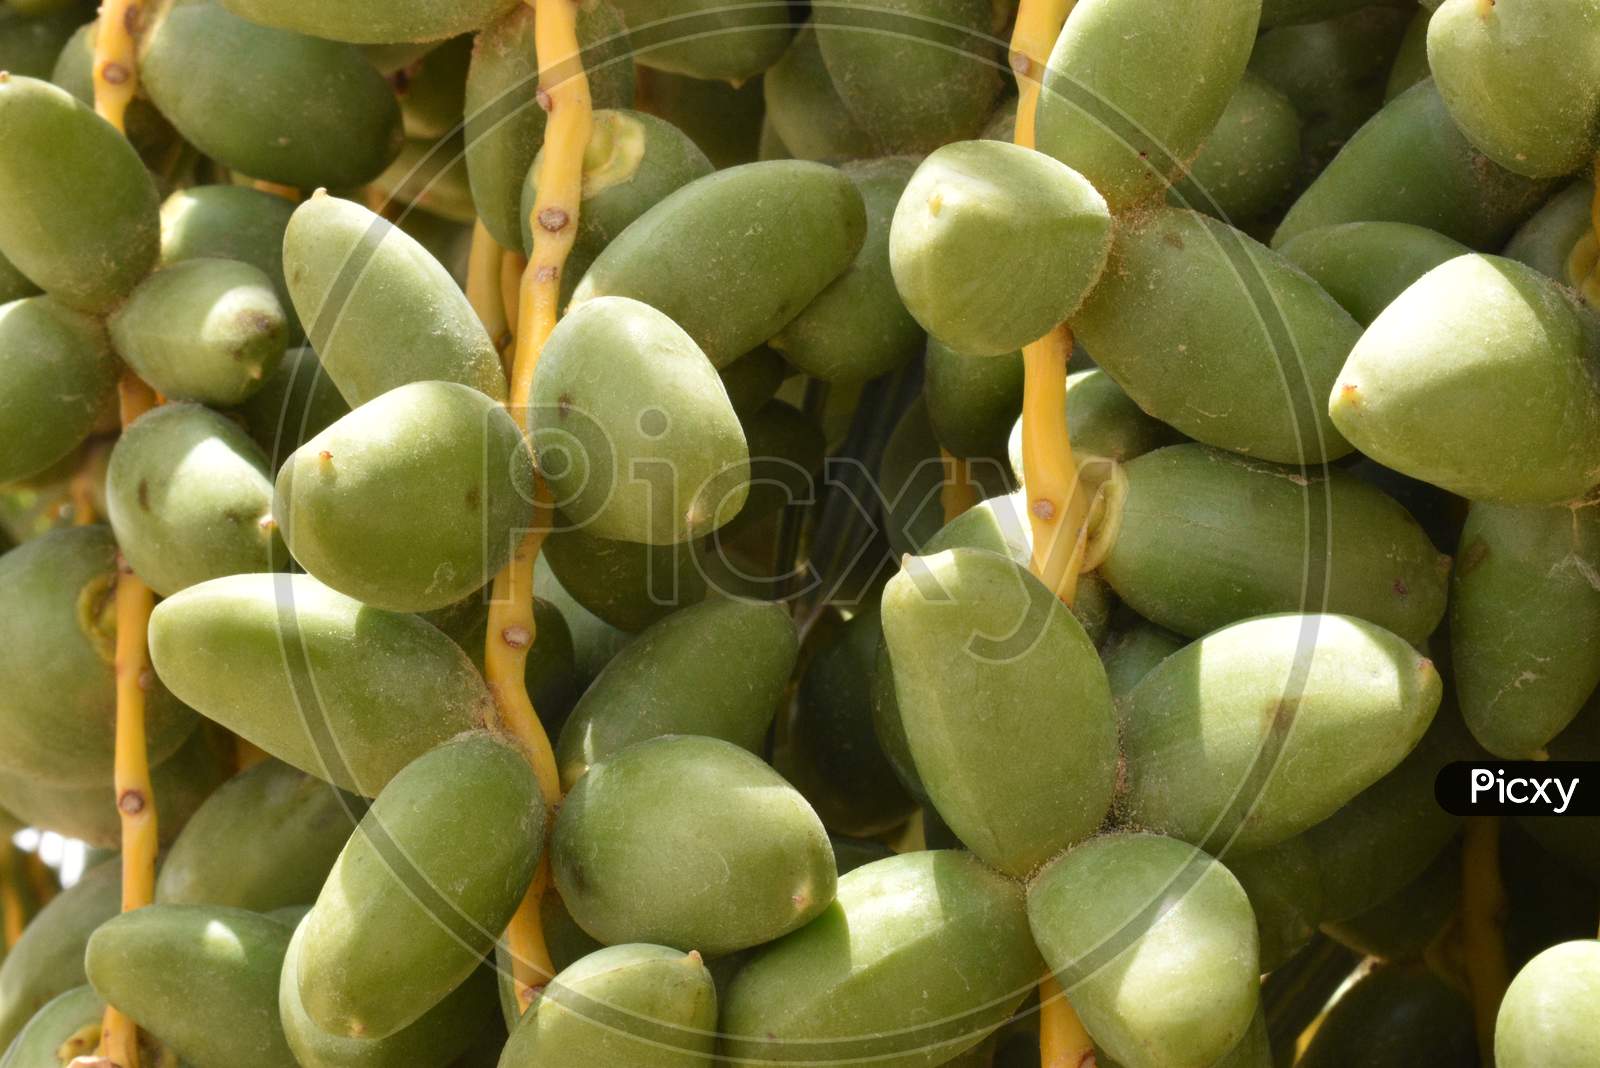 Green Dates Palm Fruit With Branches On Dates Palm Tree.Starting Stage Of The Date Fruit.